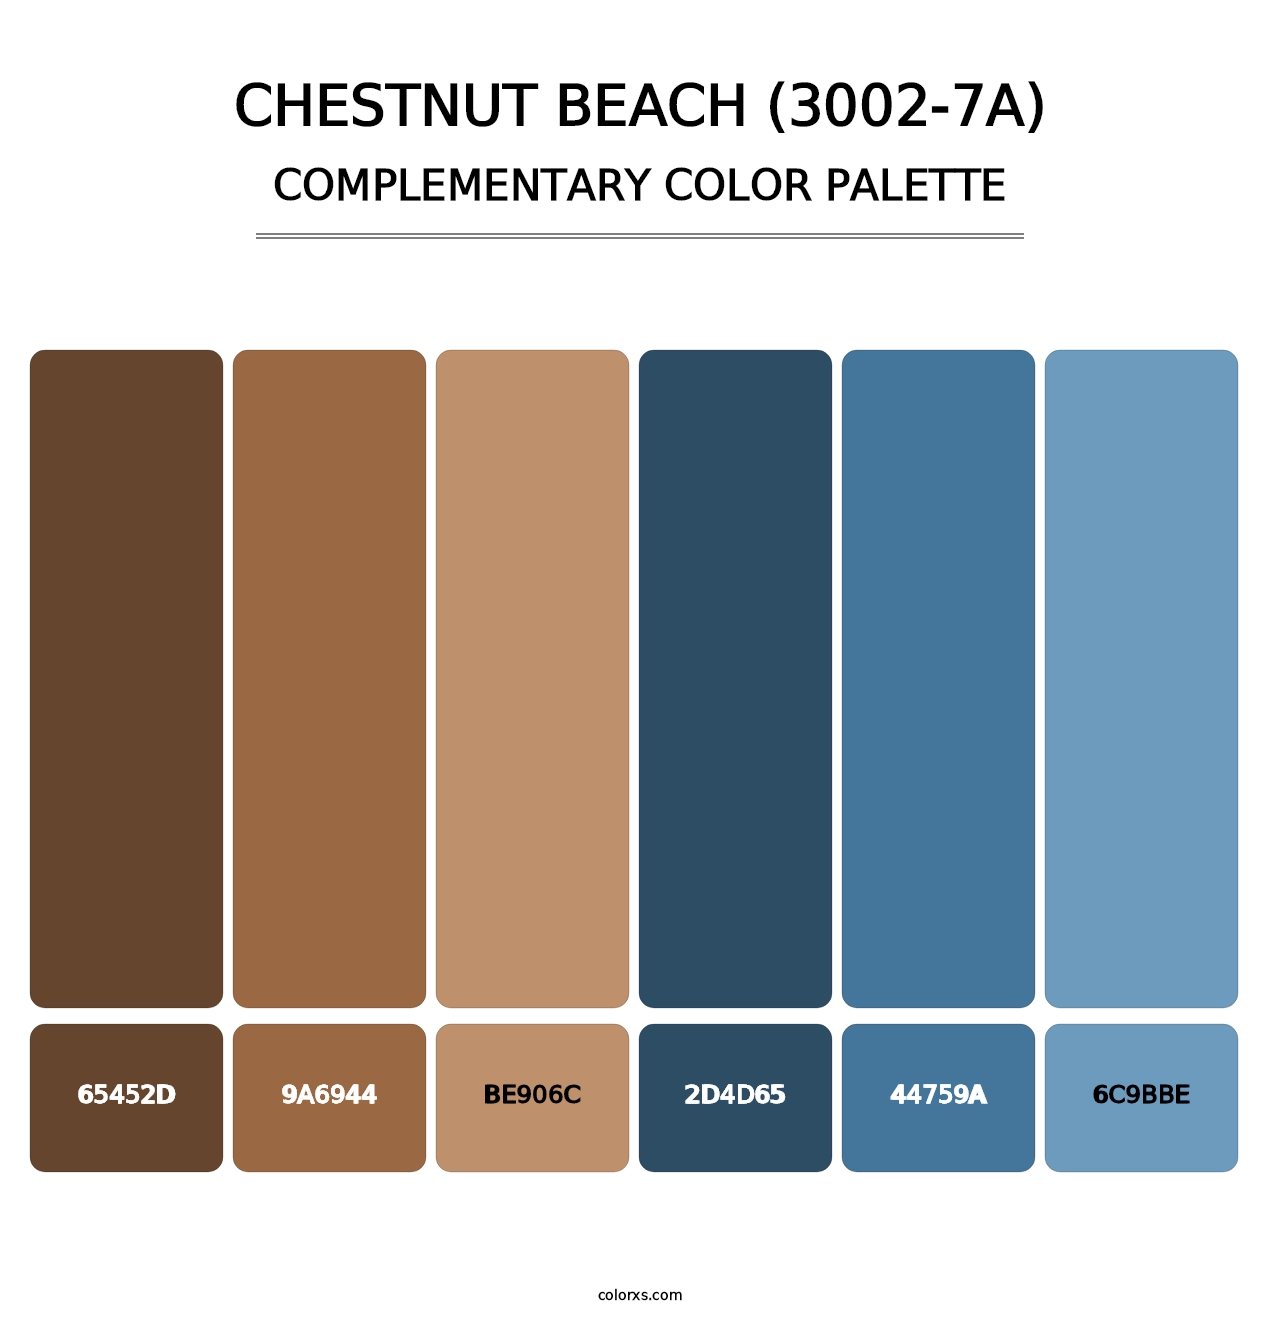 Chestnut Beach (3002-7A) - Complementary Color Palette